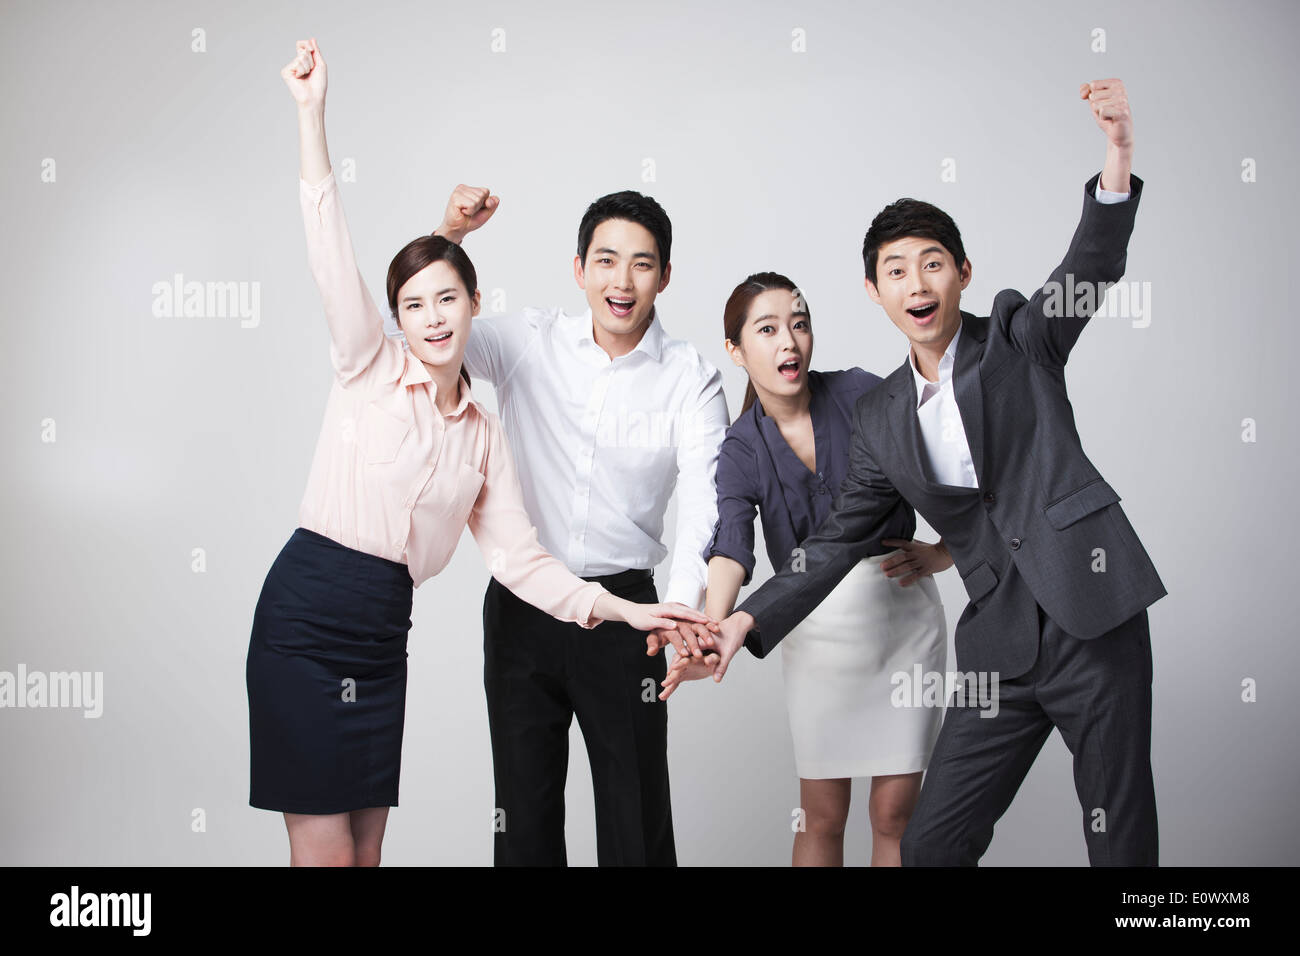 business people with team spirit Stock Photo